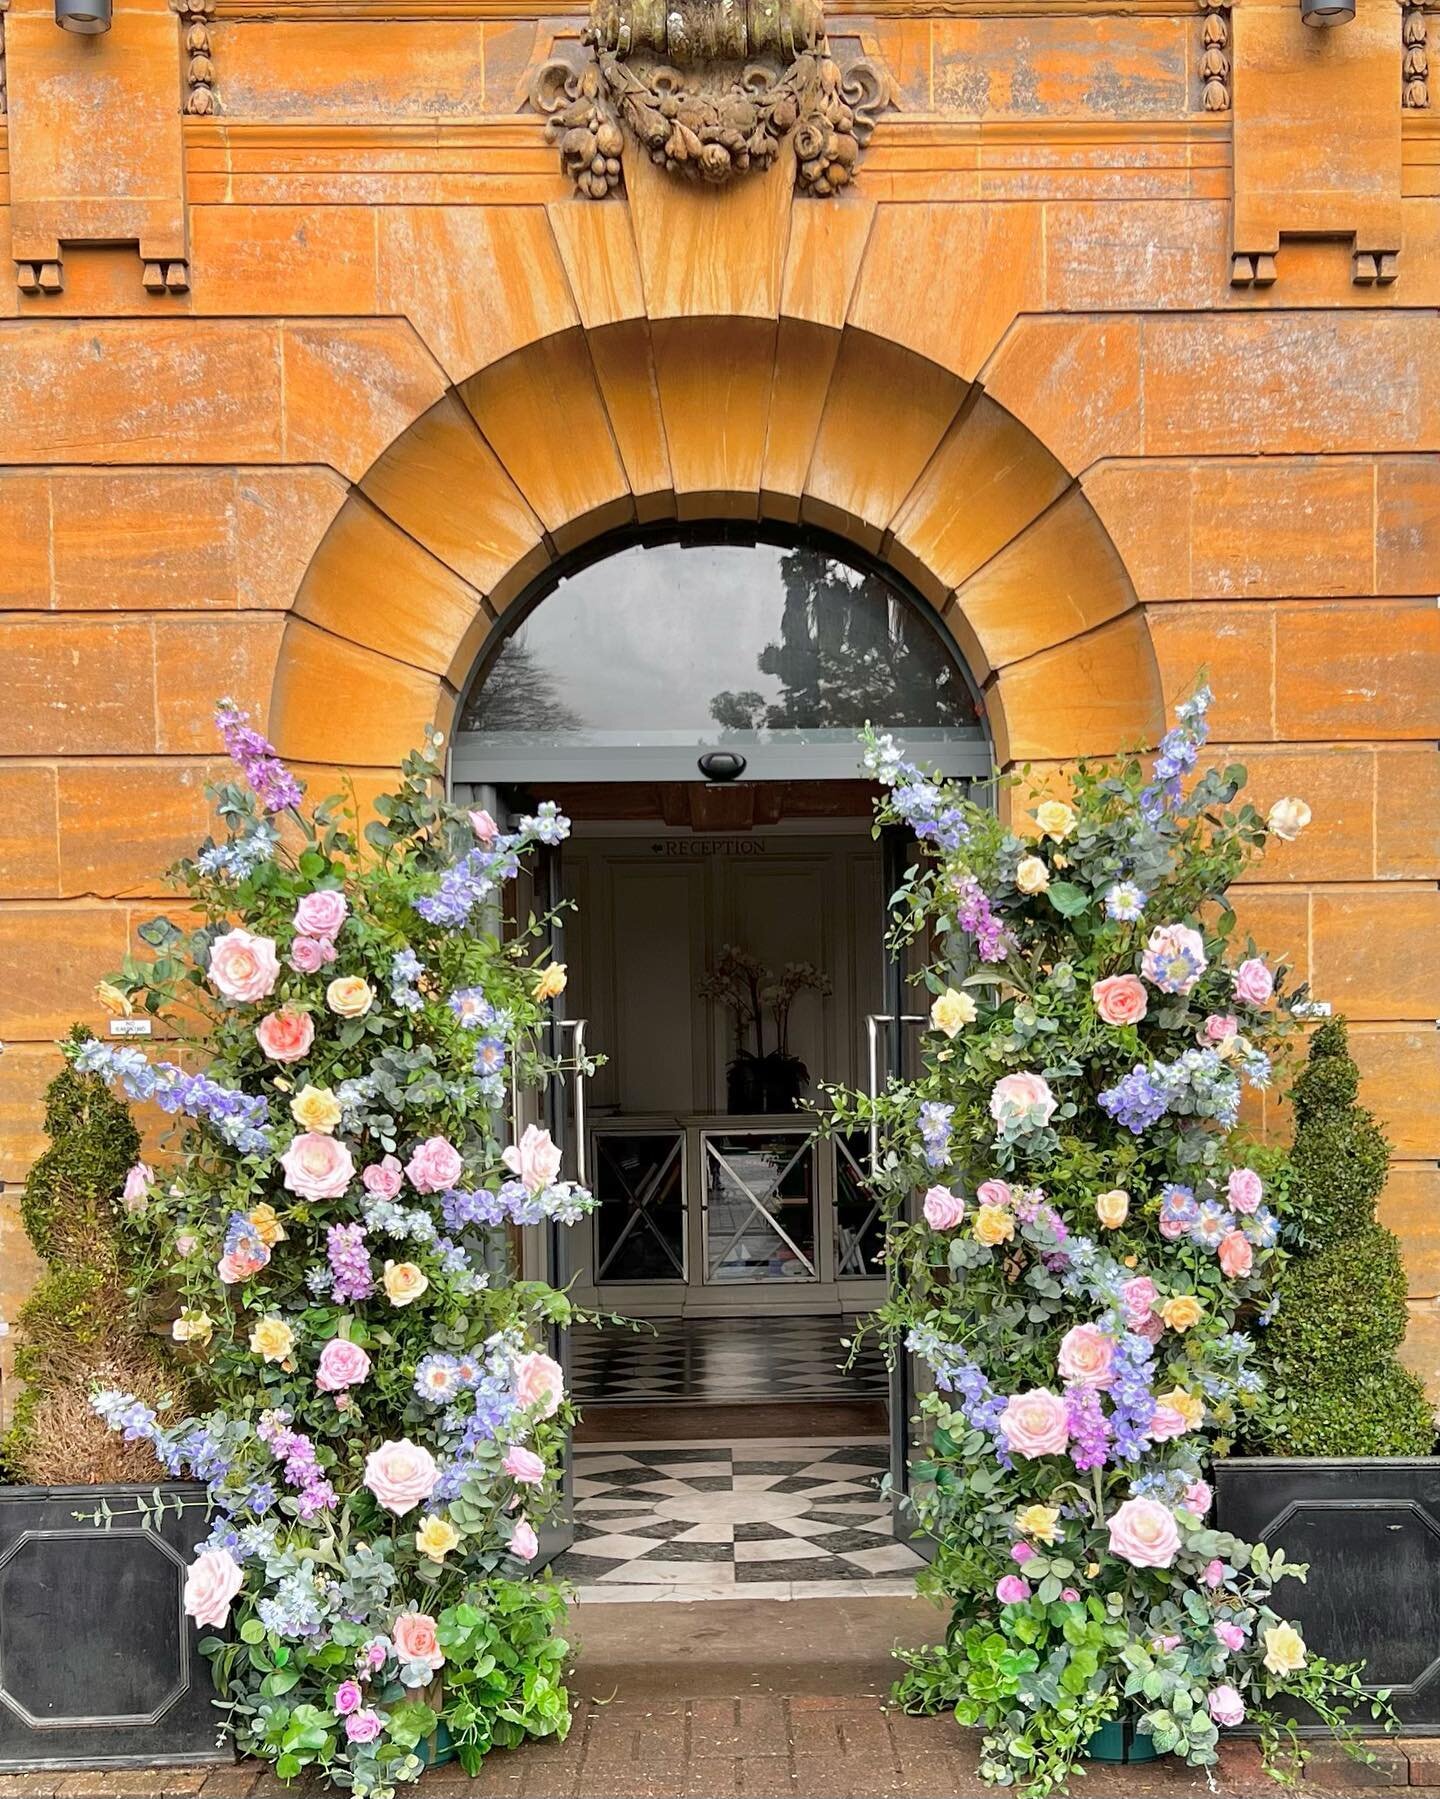 Floral pillars are so popular. They can be repositioned much easier than an arch. Use to dress a gazebo or grand entrance then move inside to add wow factor at the wedding breakfast.  #guildfordwedding #weddingfloristguildford #fauxweddingflower #bar